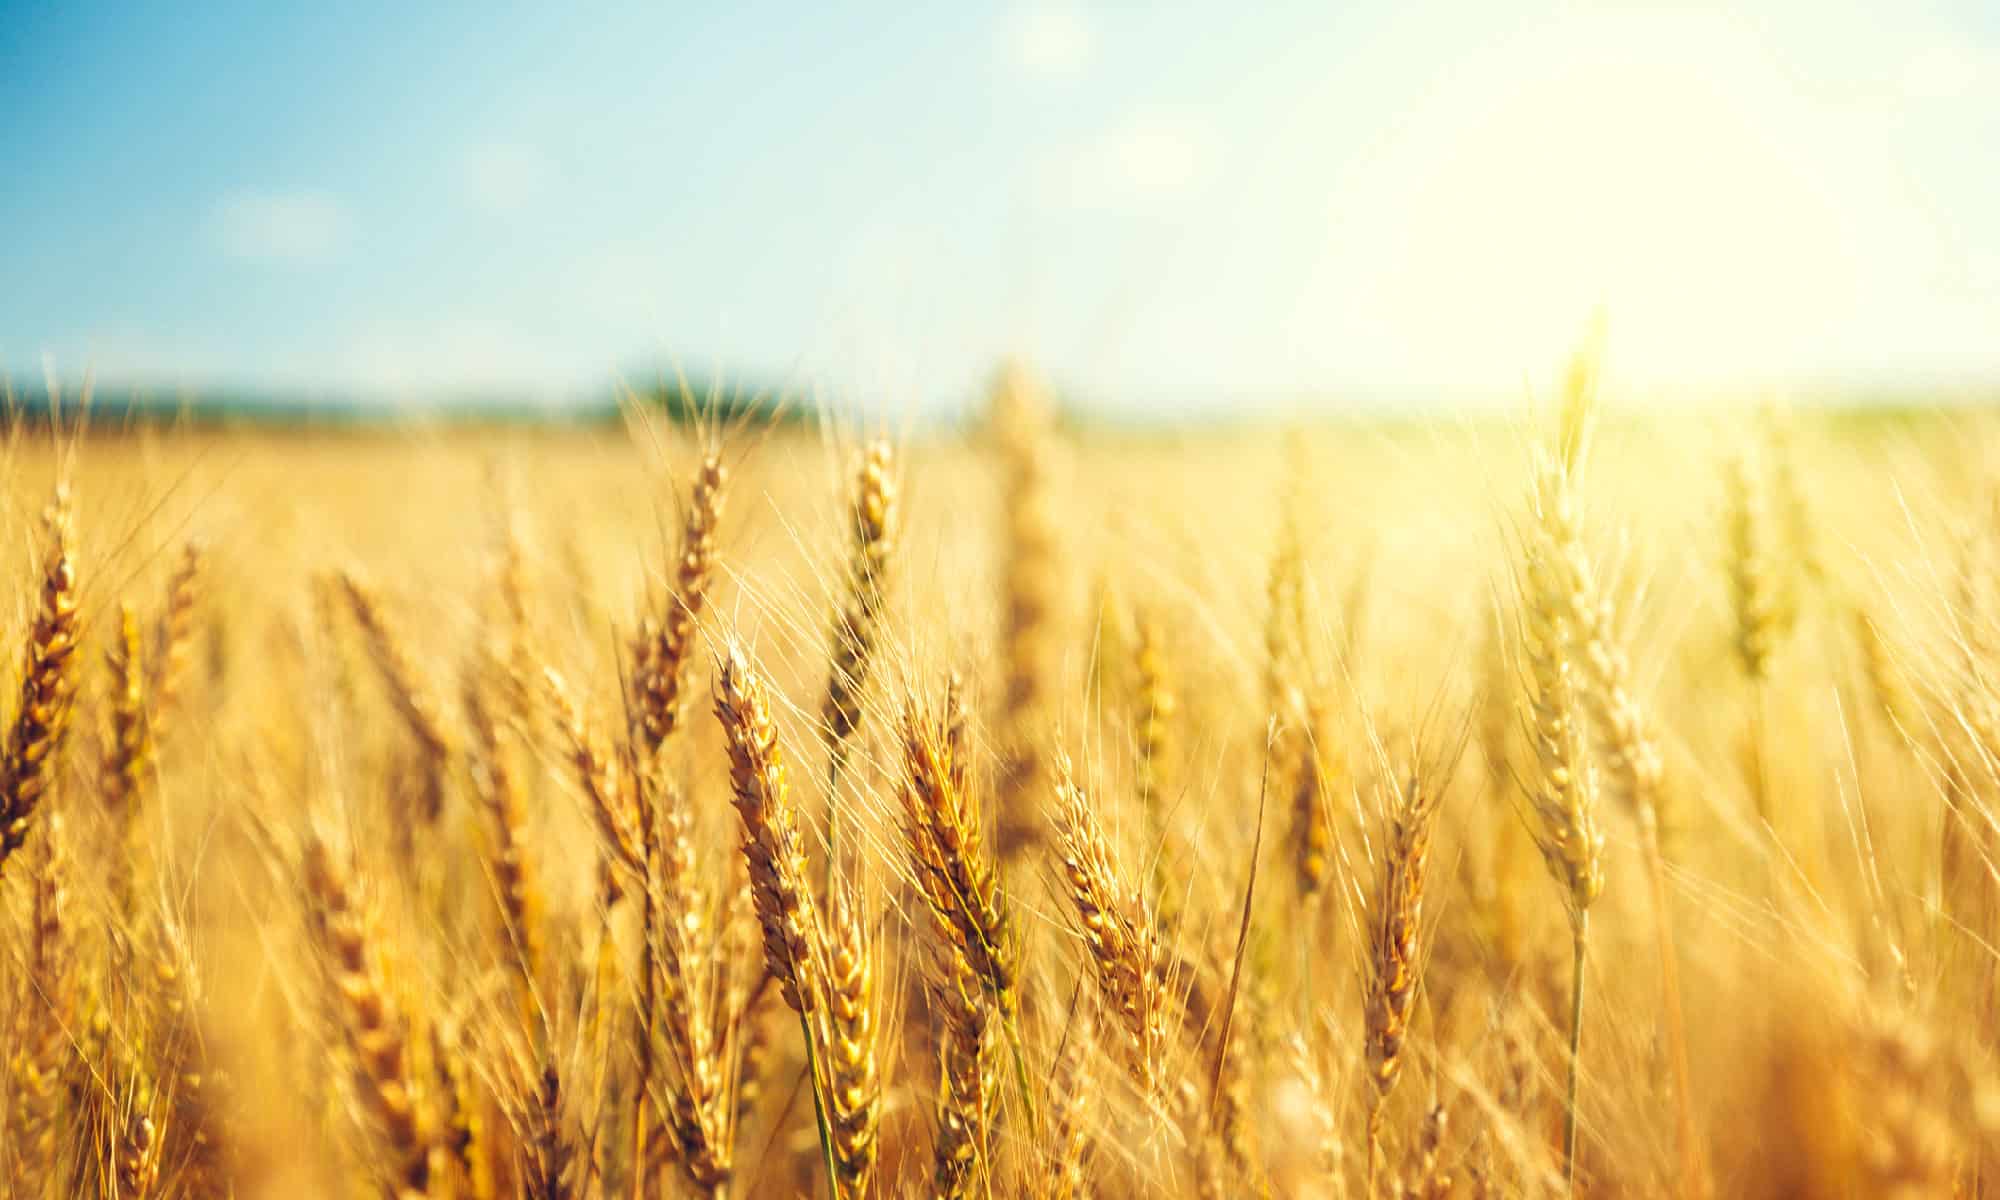 Wheat, Agricultural Field, Cereal Plant, Crop - Plant, Agriculture